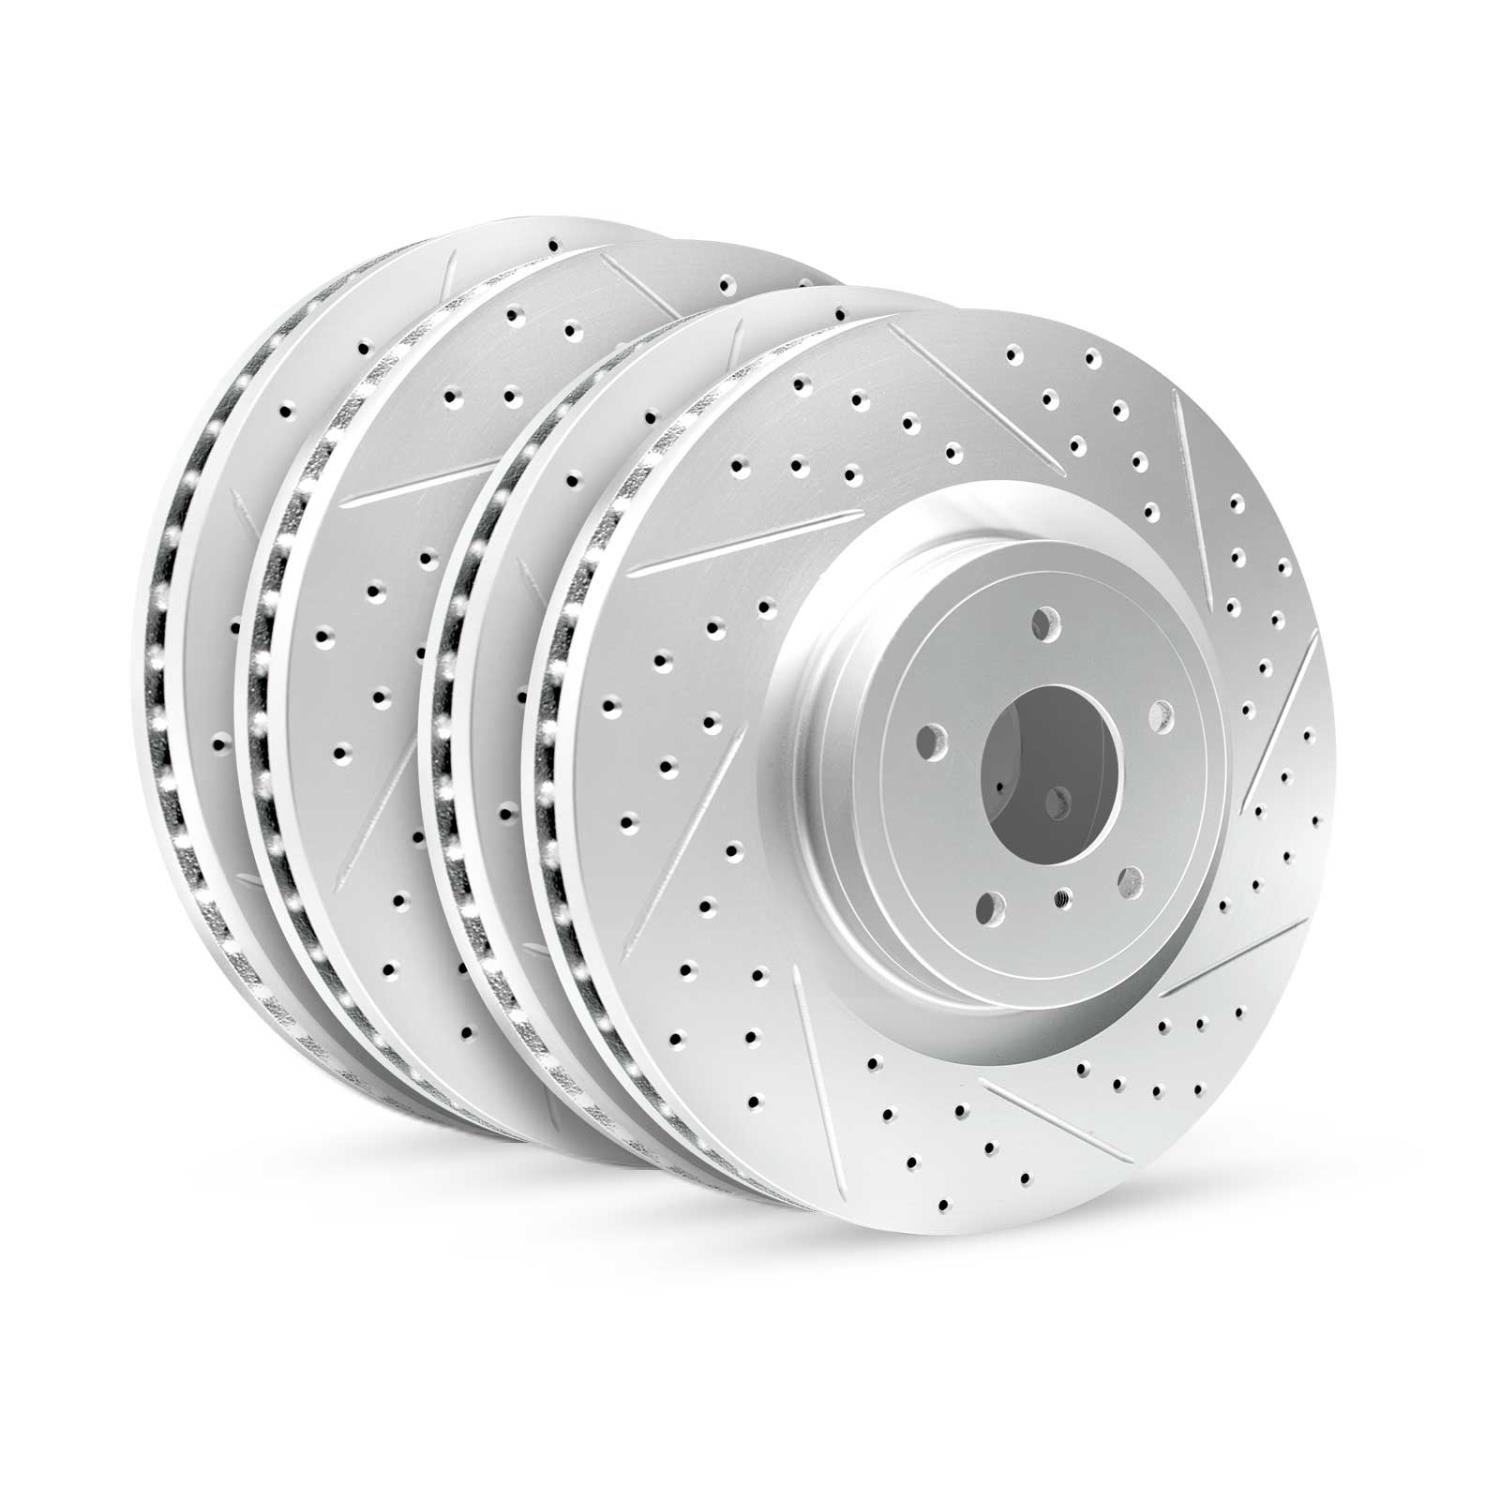 GEO-Carbon Drilled/Slotted Rotors, 2007-2013 Infiniti/Nissan, Position: Front/Rear